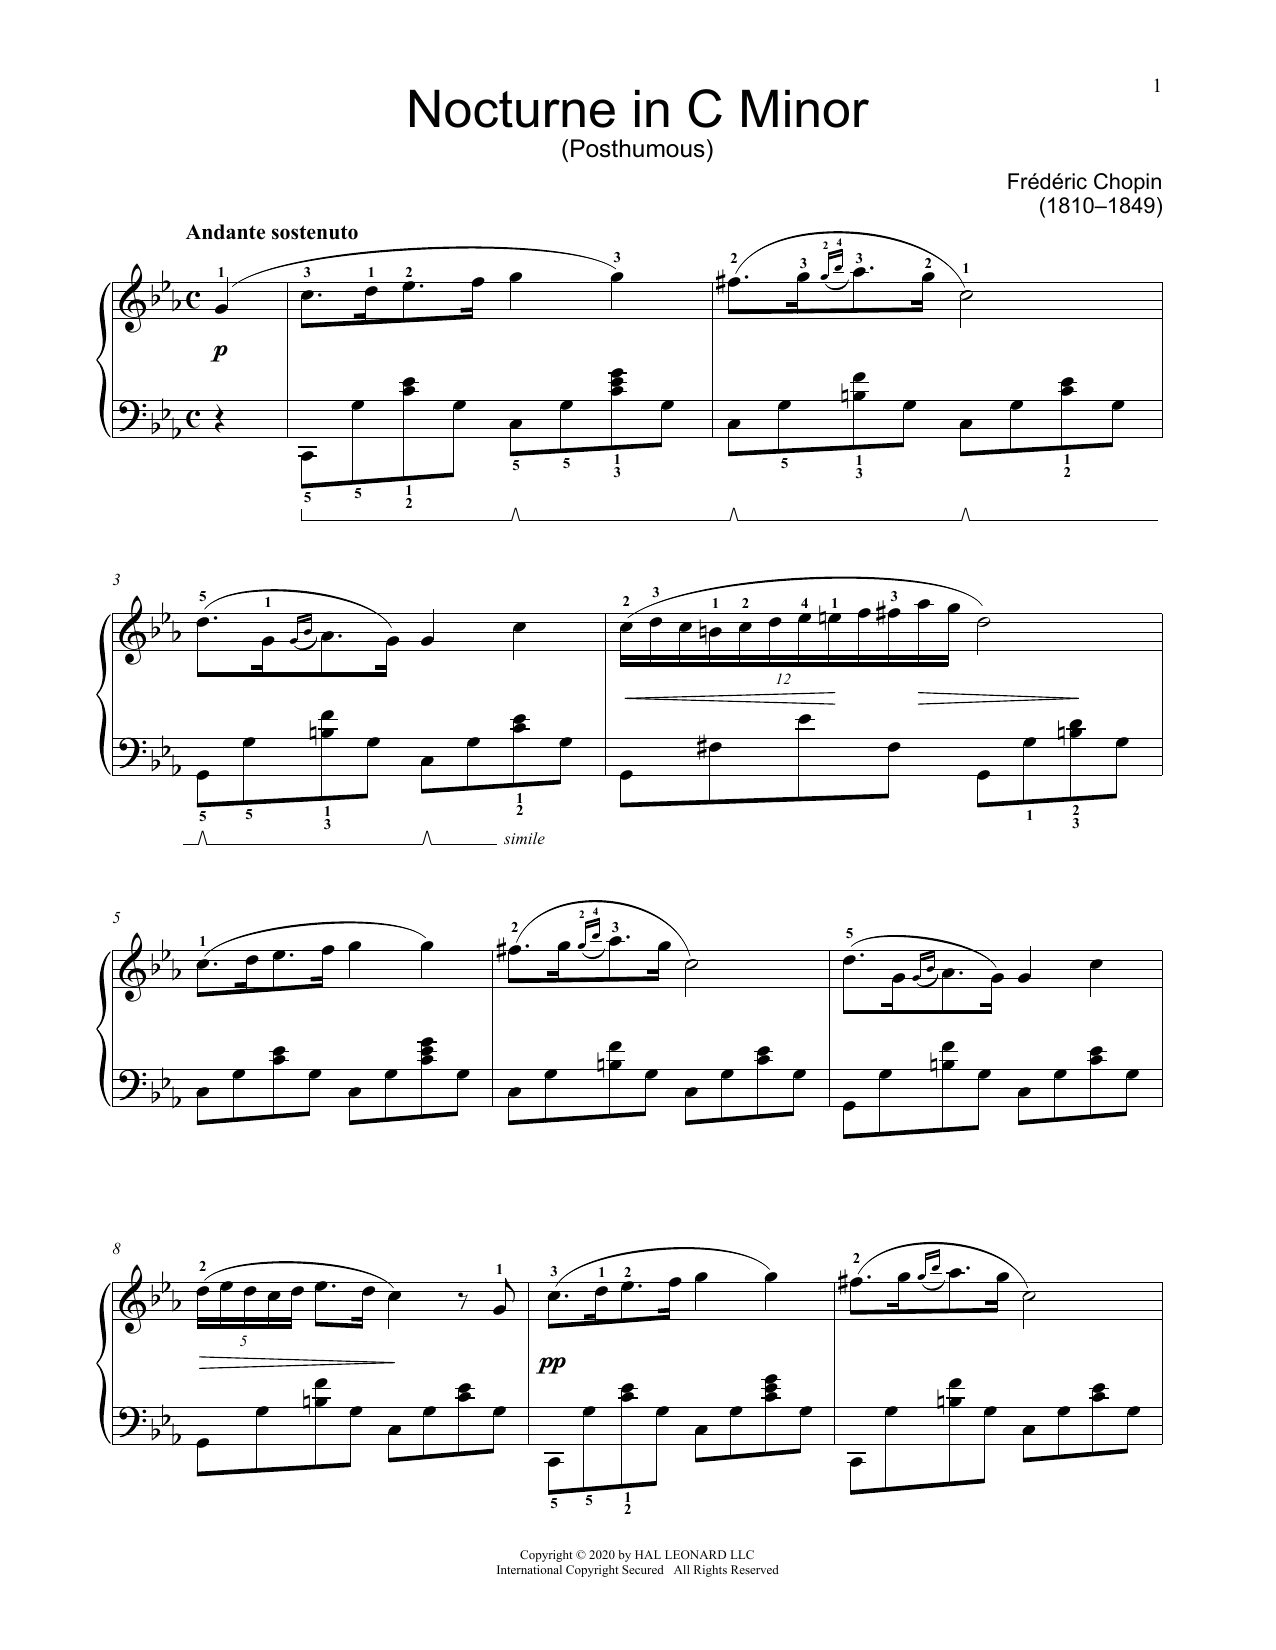 Download Frederic Chopin Nocturne In C Minor, KK. IVB, No. 8 Sheet Music